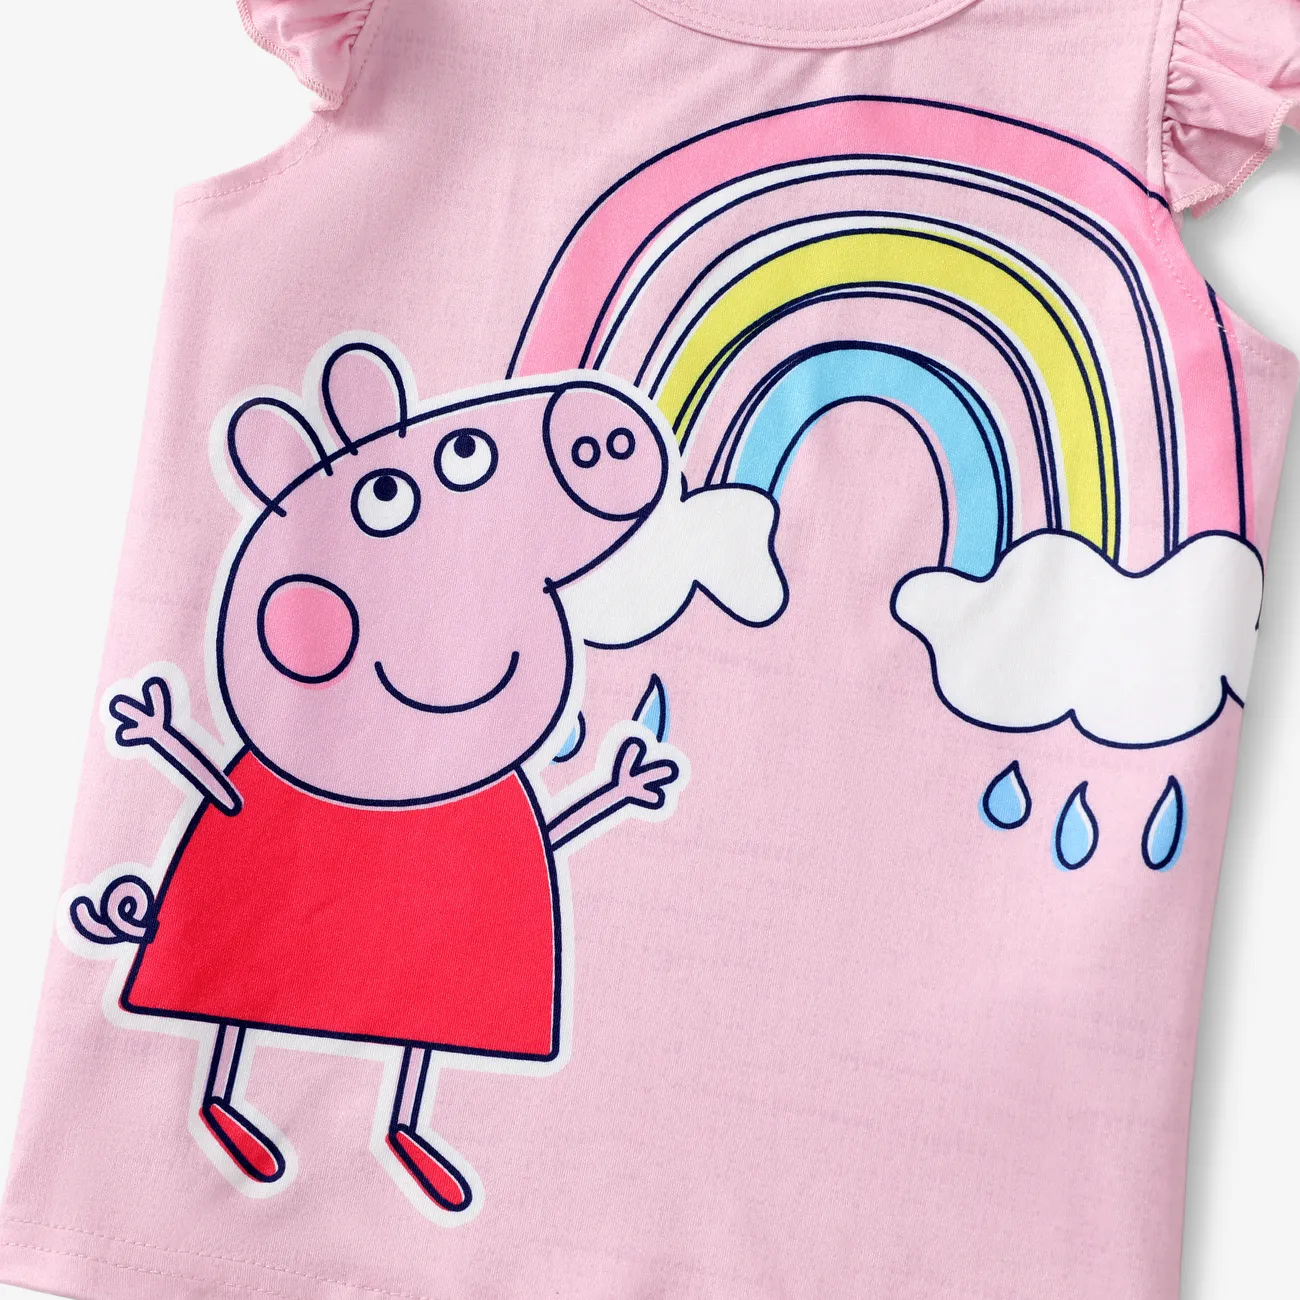 Peppa Pig Toddler Girls 1pc Rainbow Floral Character Print Flutter-sleeve Top Pink big image 1